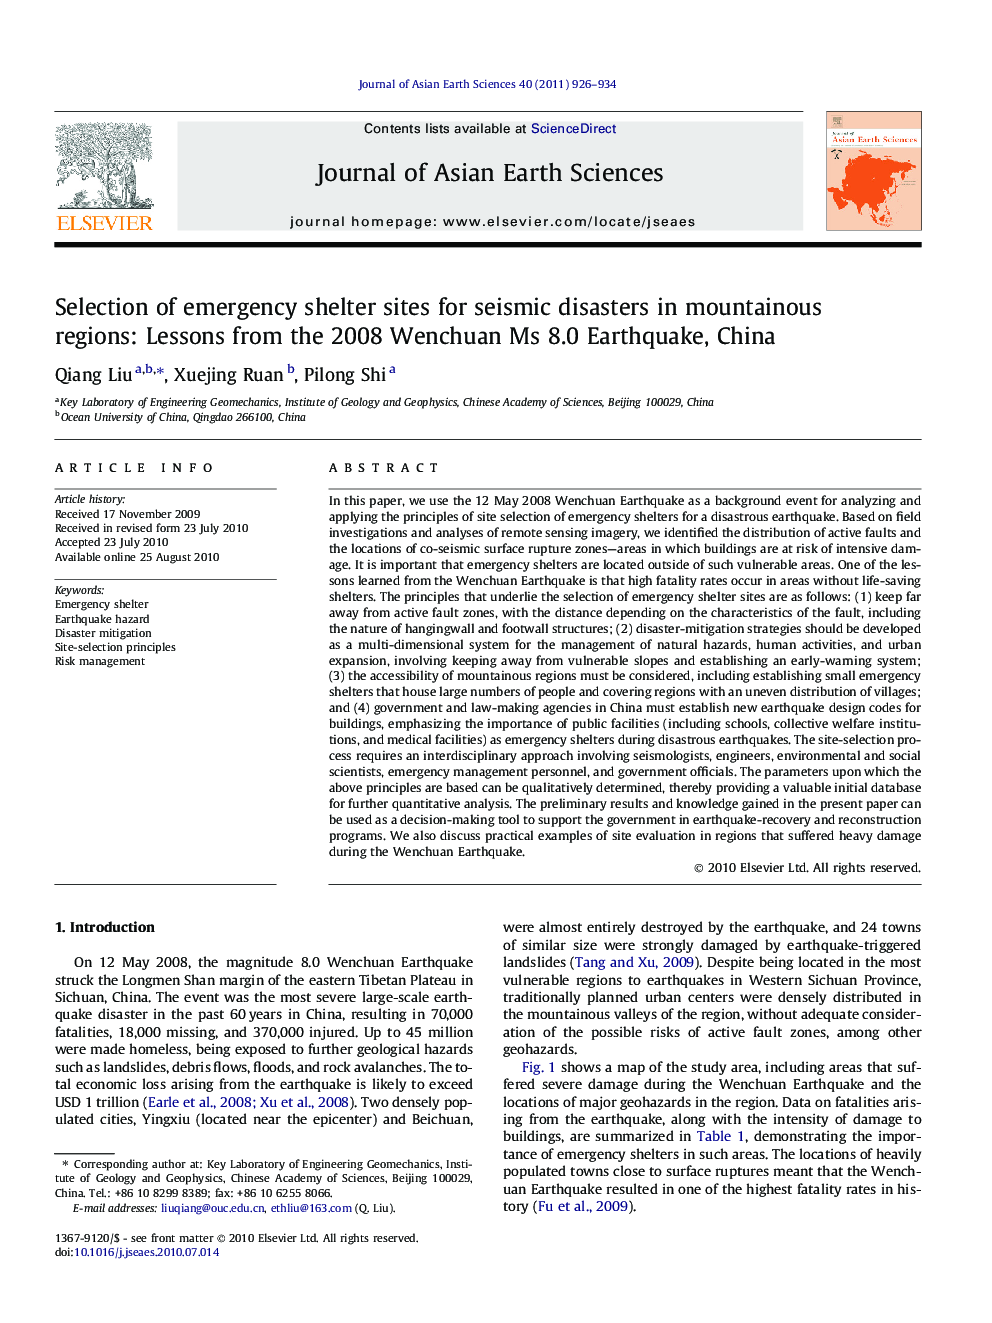 Selection of emergency shelter sites for seismic disasters in mountainous regions: Lessons from the 2008 Wenchuan Ms 8.0 Earthquake, China